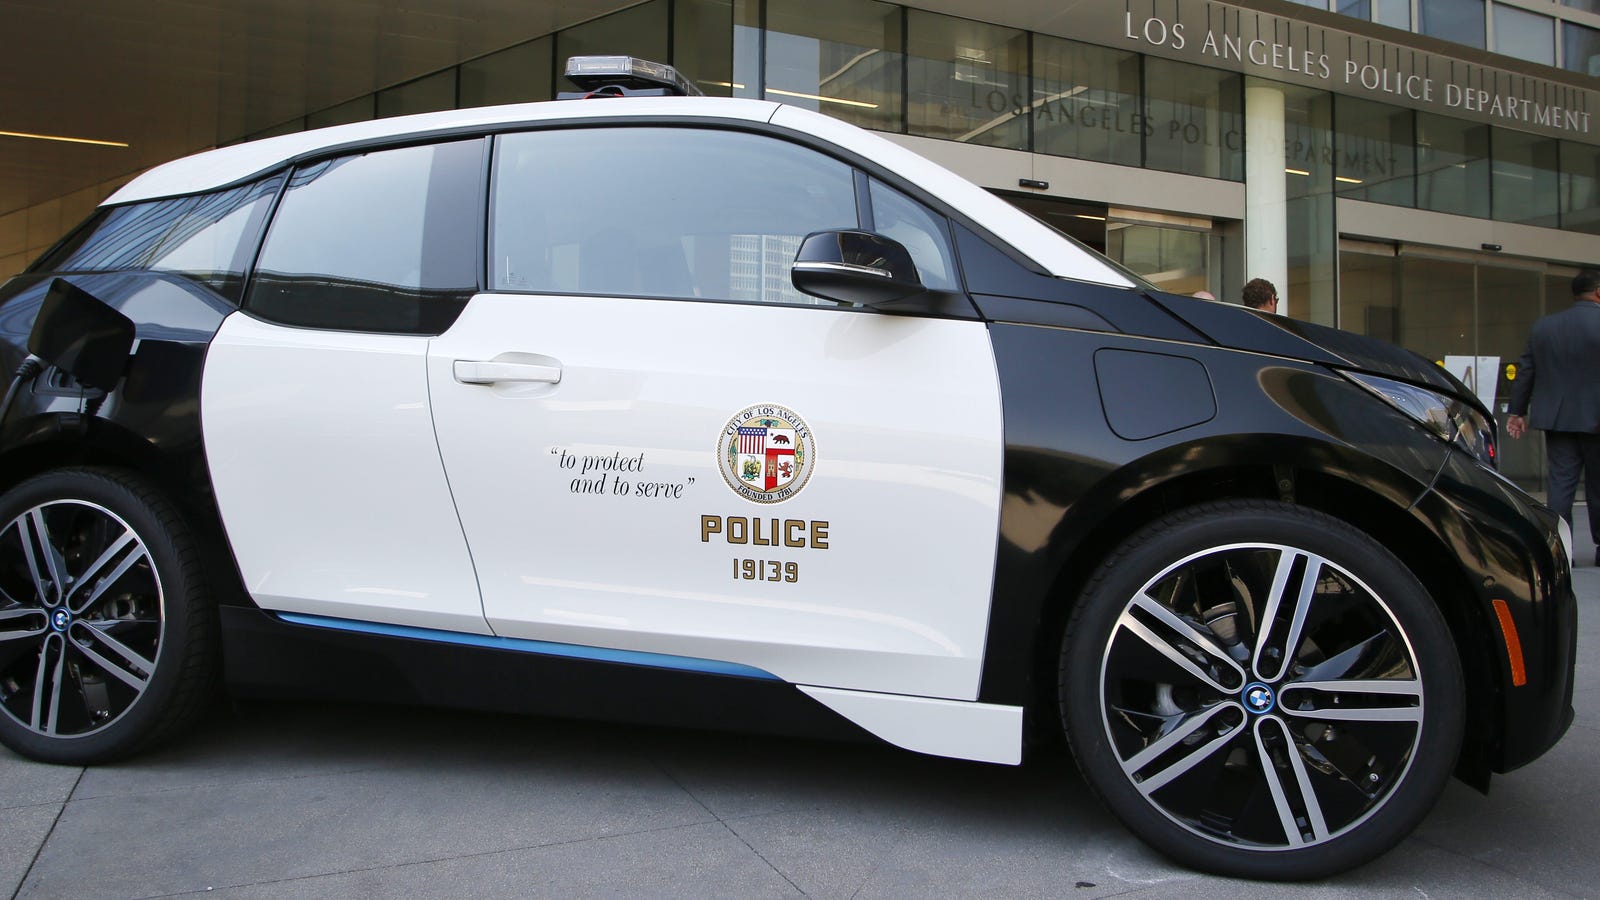 That Fleet Of Electric Cars The LAPD Paid At Least 2.9 Million For? It